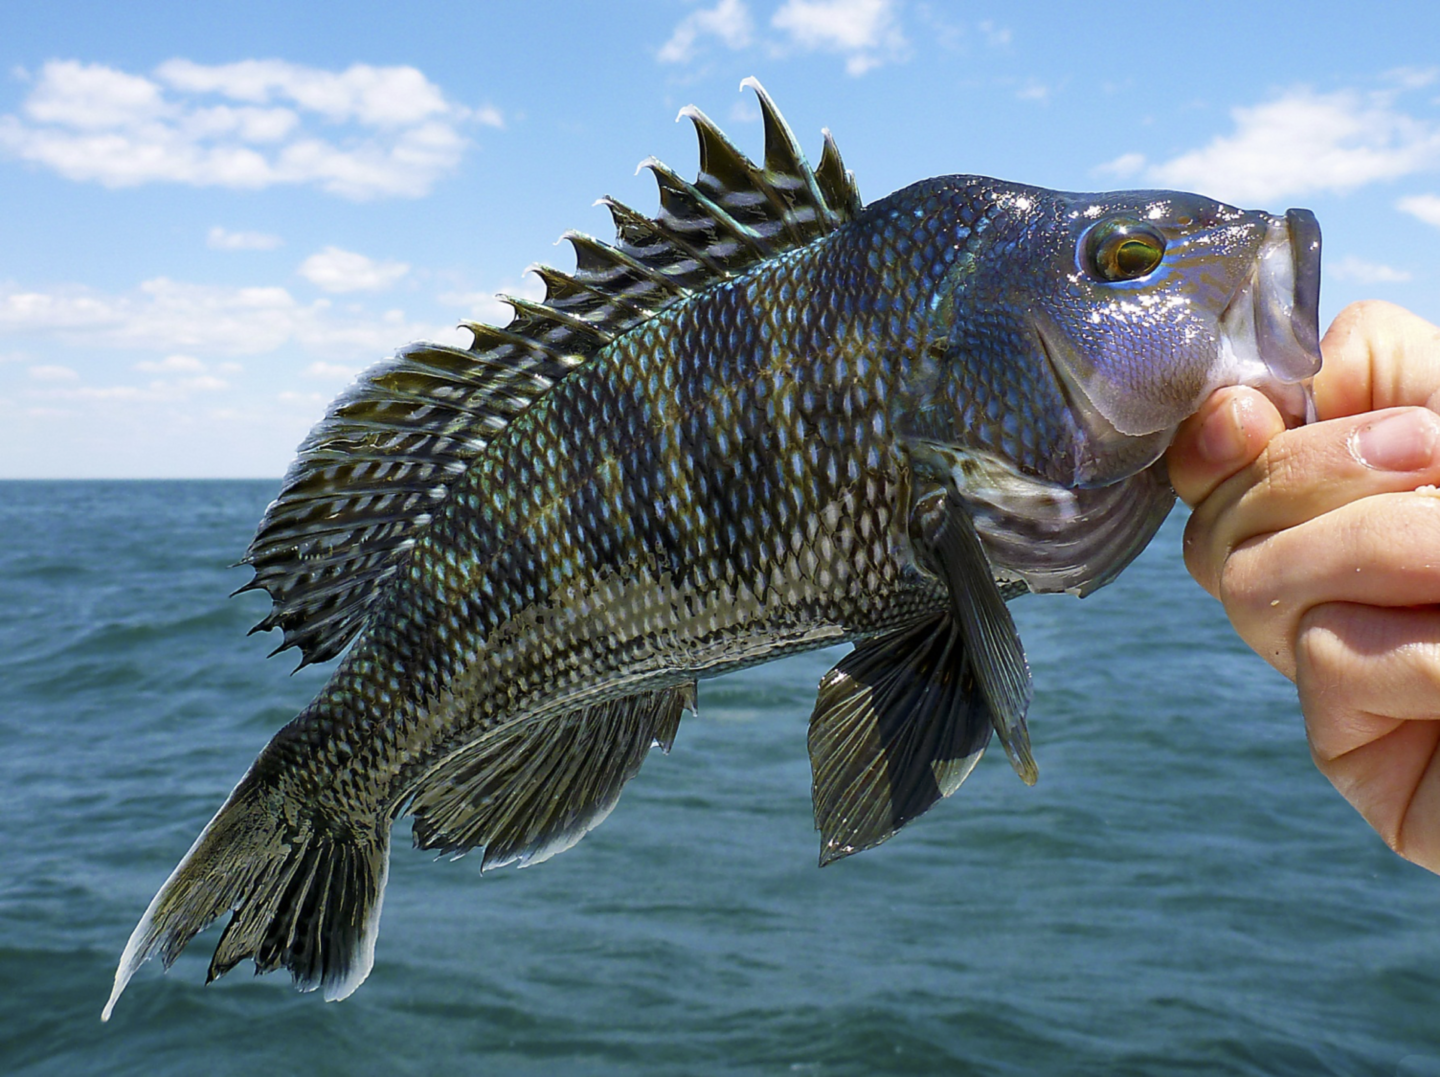 Black sea bass are one of the climate change "winners" that have seen their productivity increase with warming ocean temperatures in the East China Sea